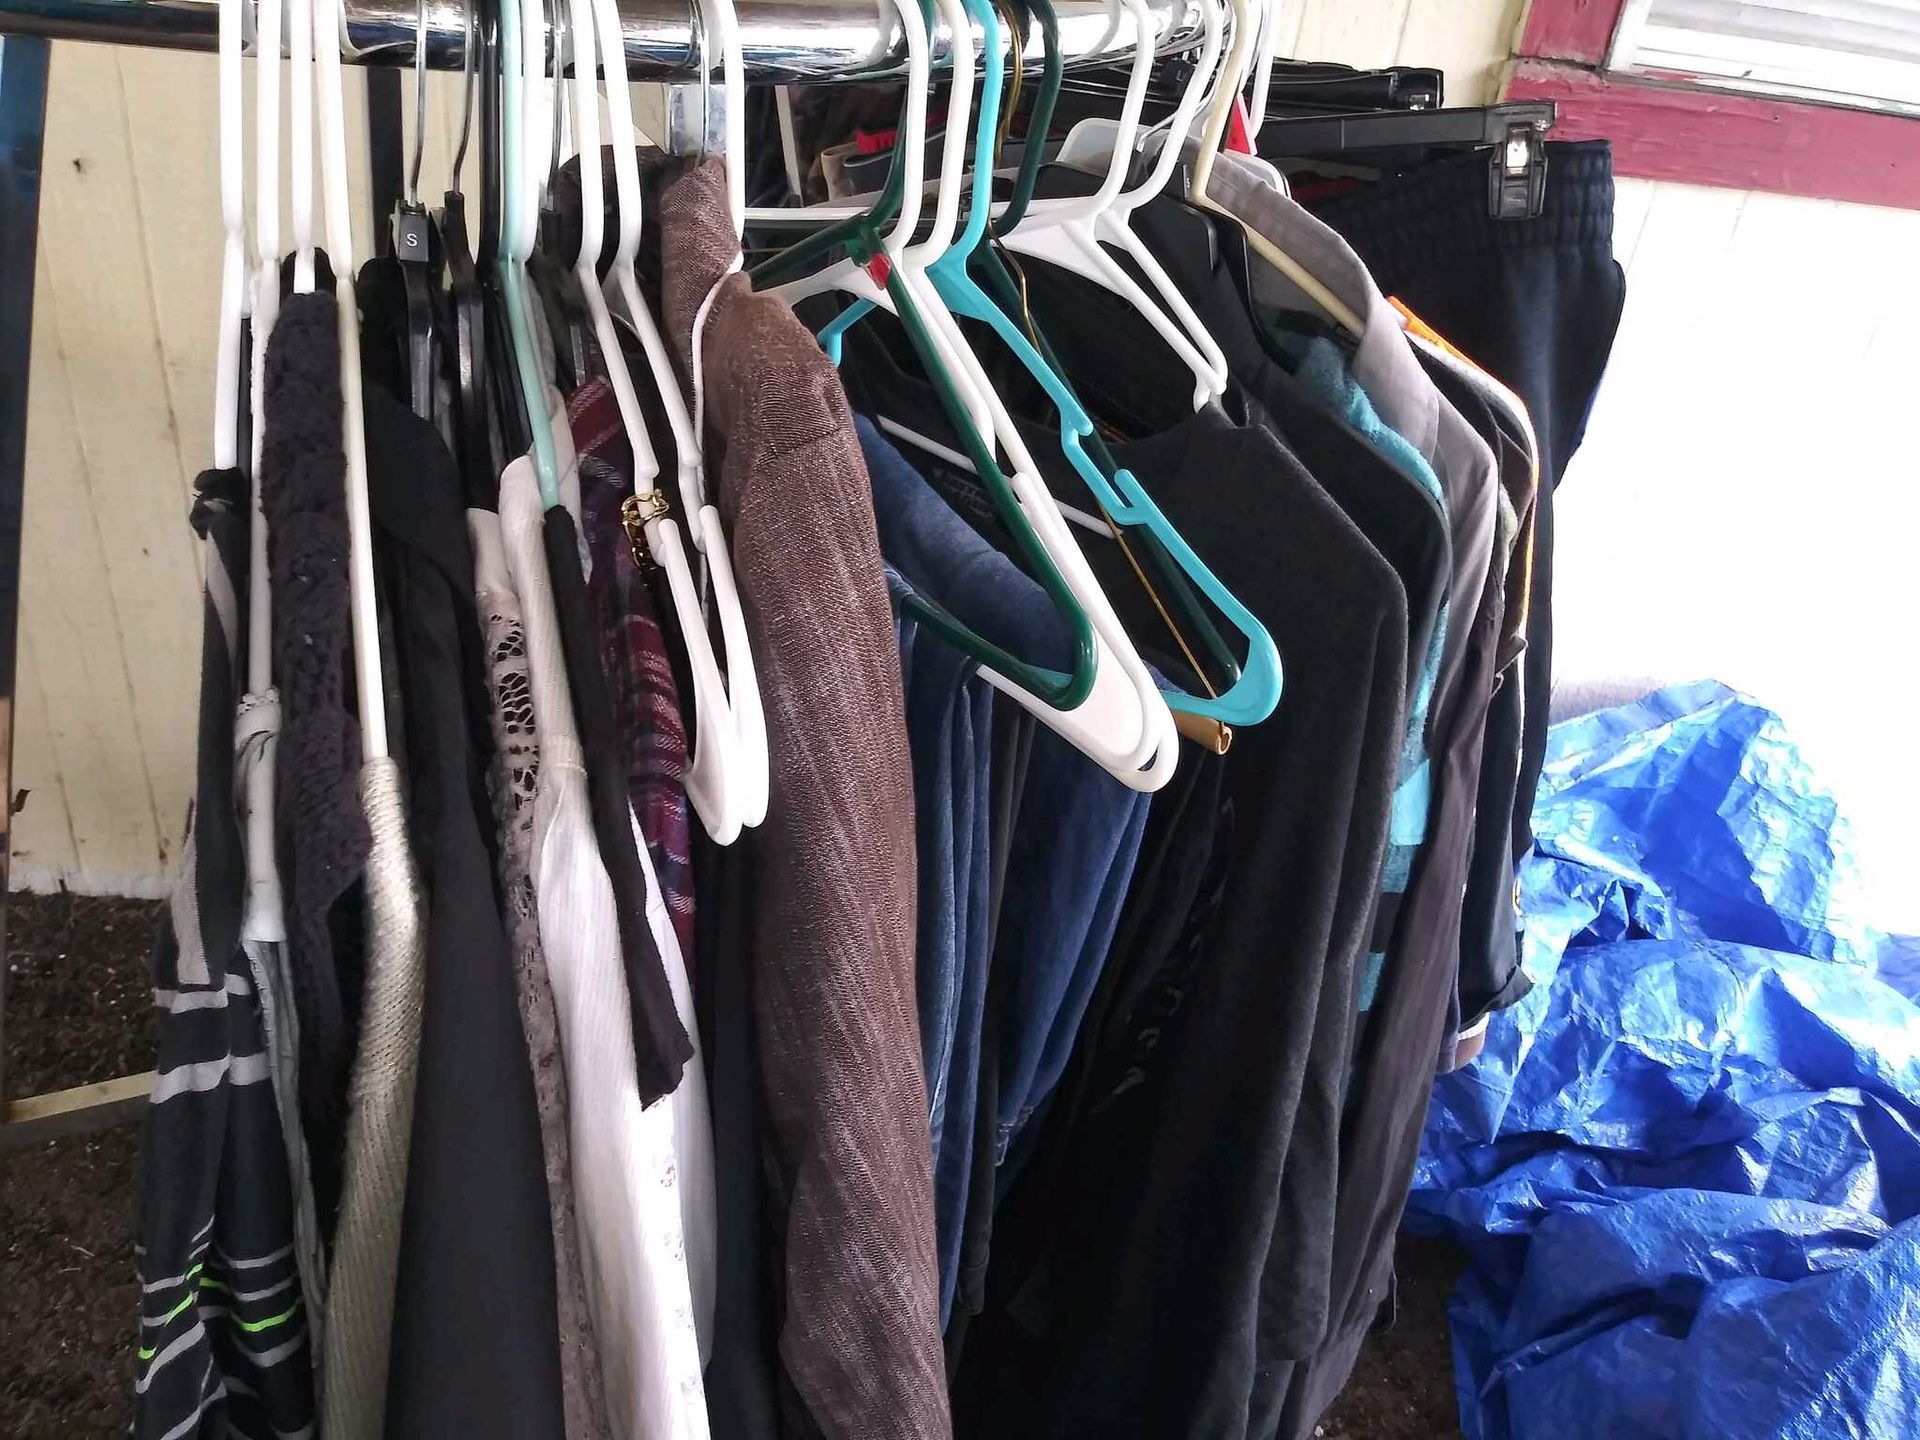 Good Clothes Mostly Men’s Clothes Different Sizes $20 Firm / Mpu